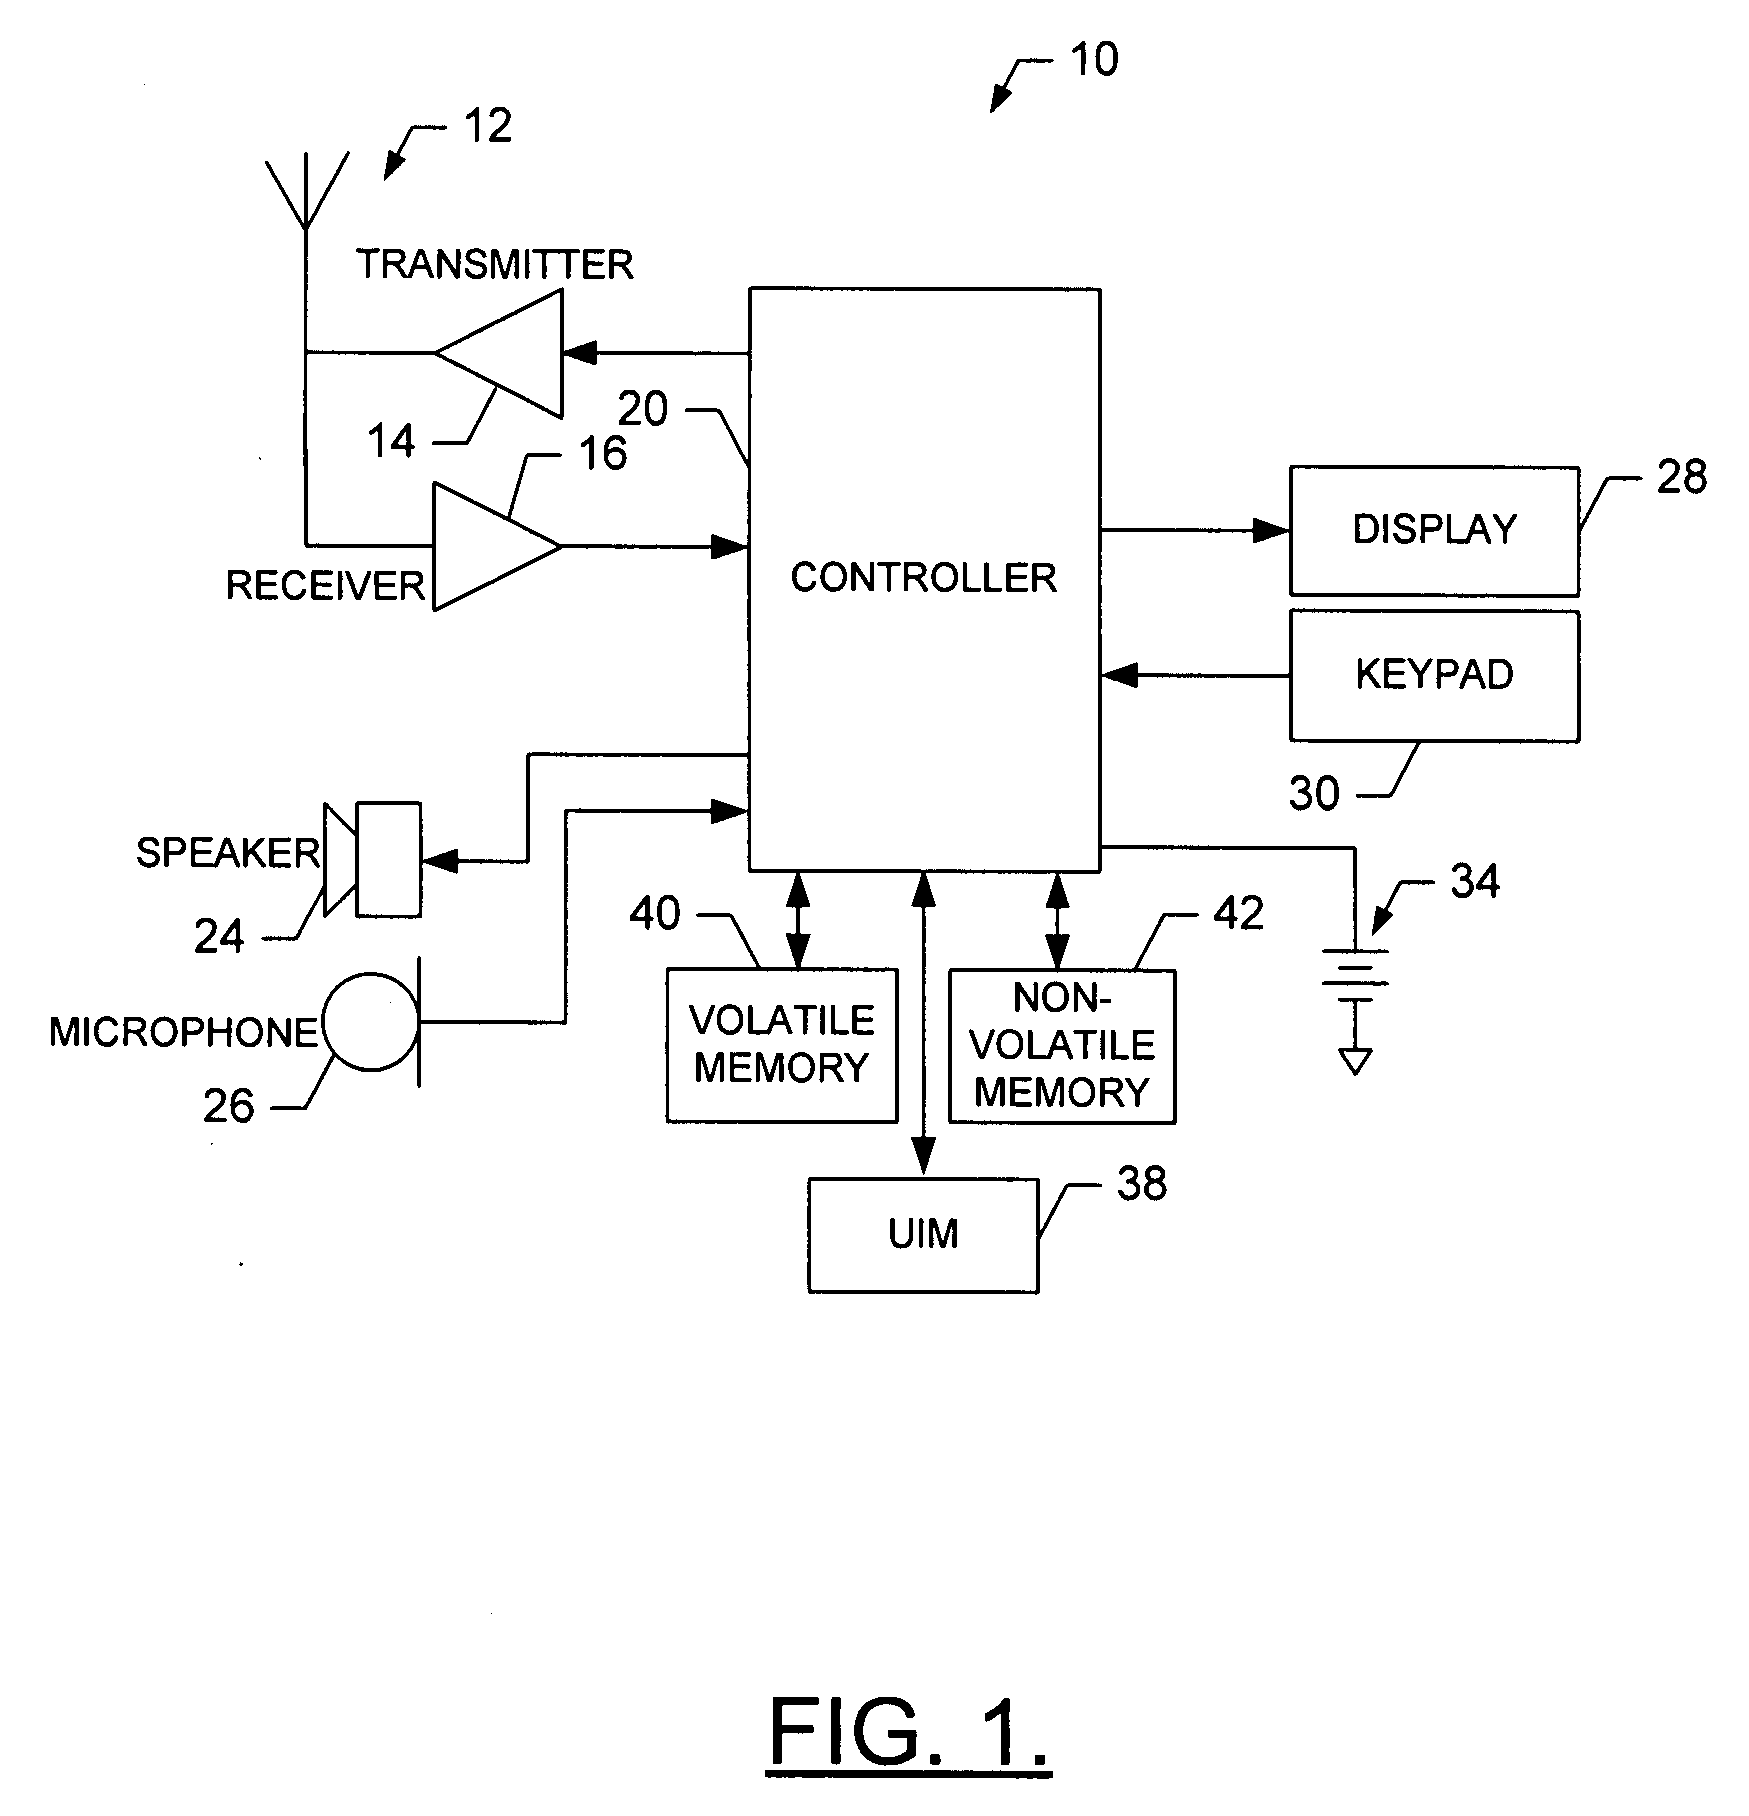 Method, apparatus and computer program product for providing voice conversion using temporal dynamic features